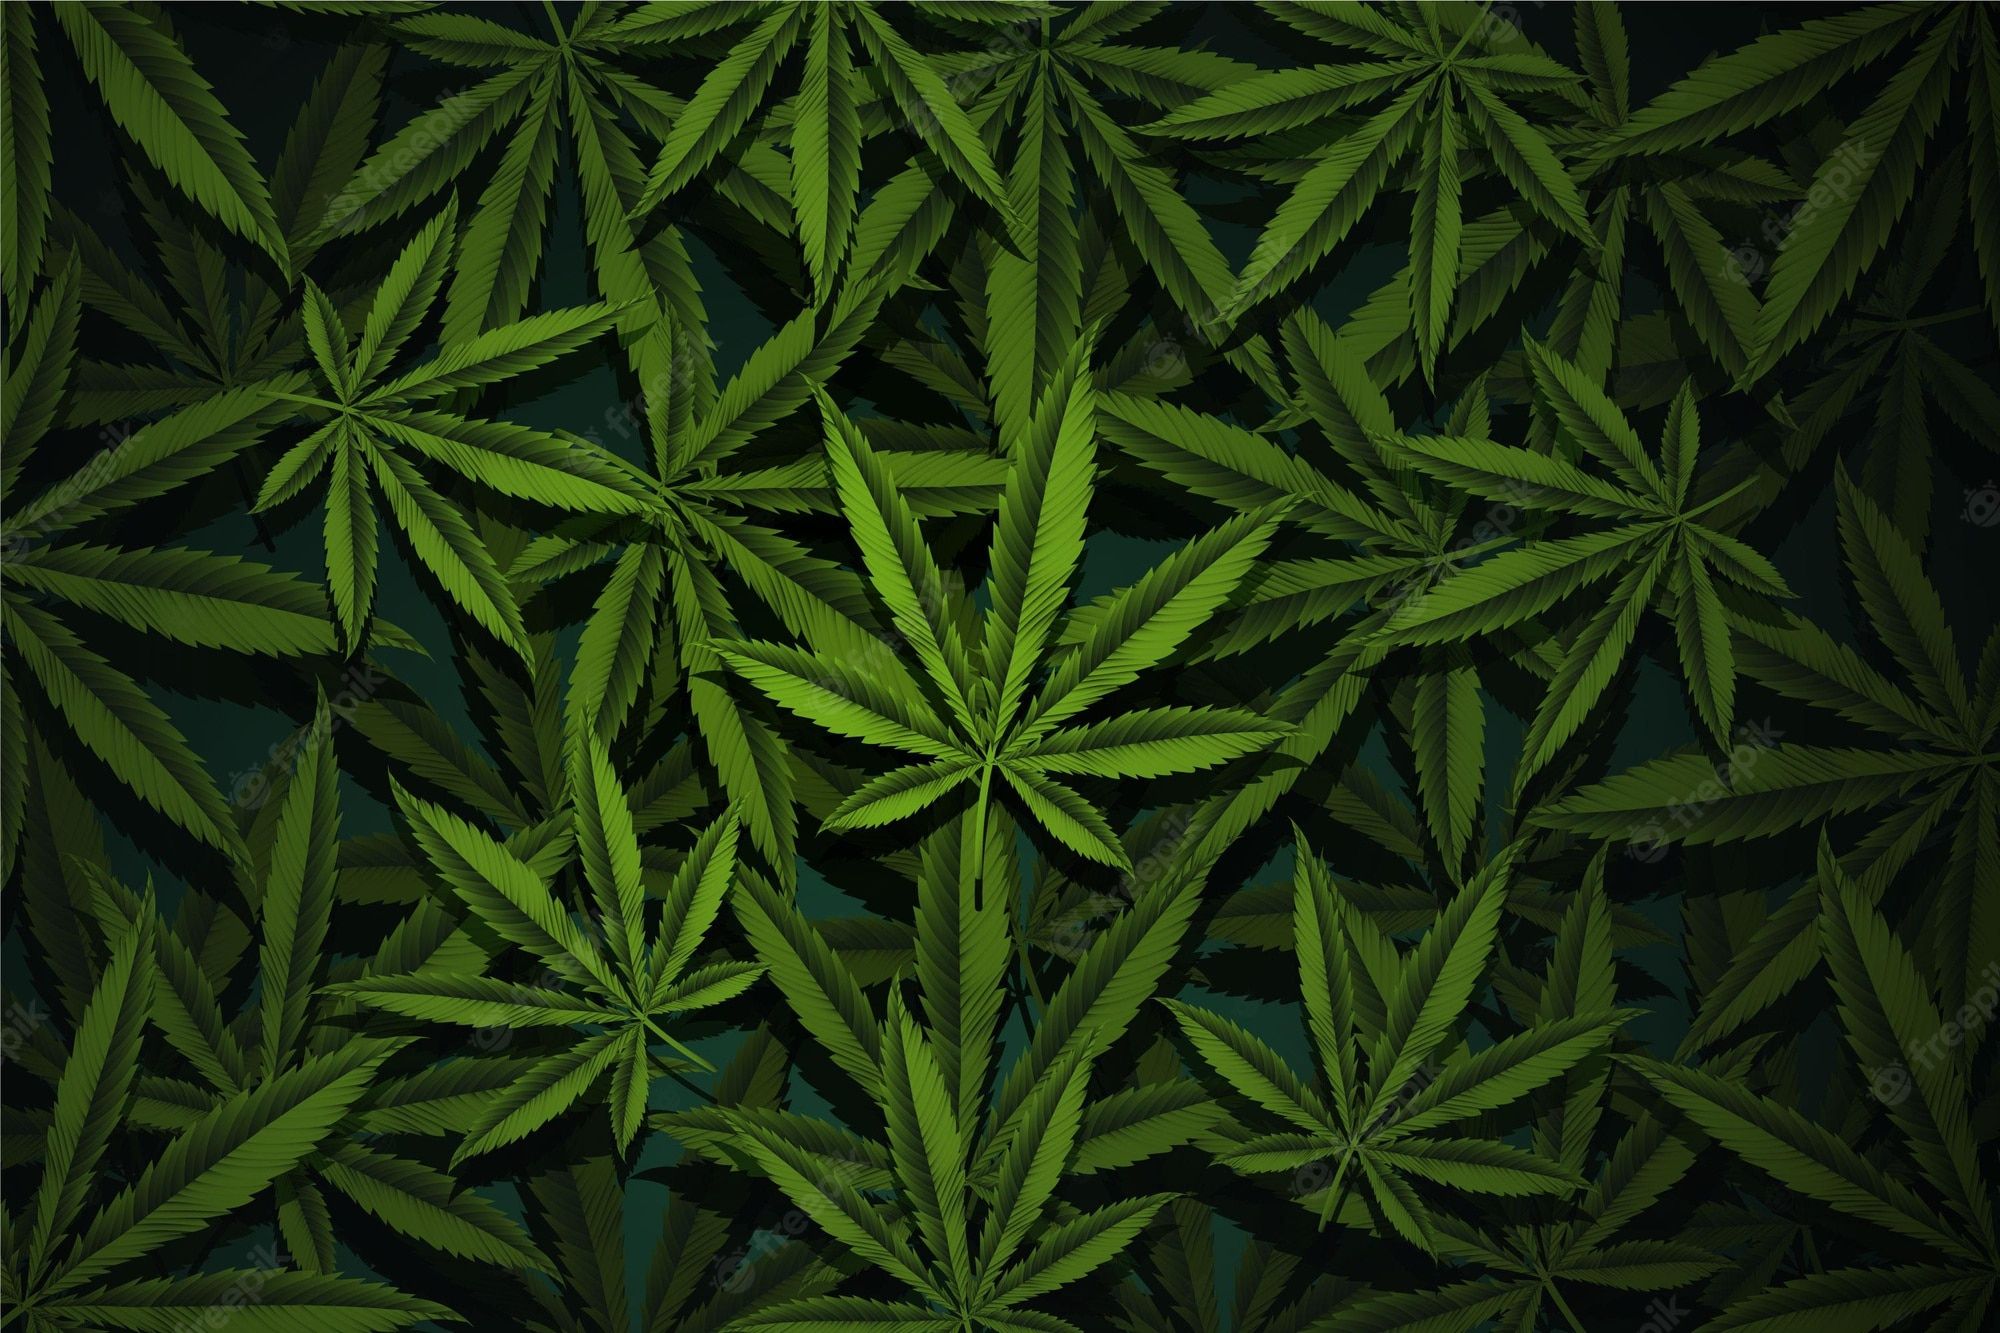 A background of green cannabis leaves - Weed